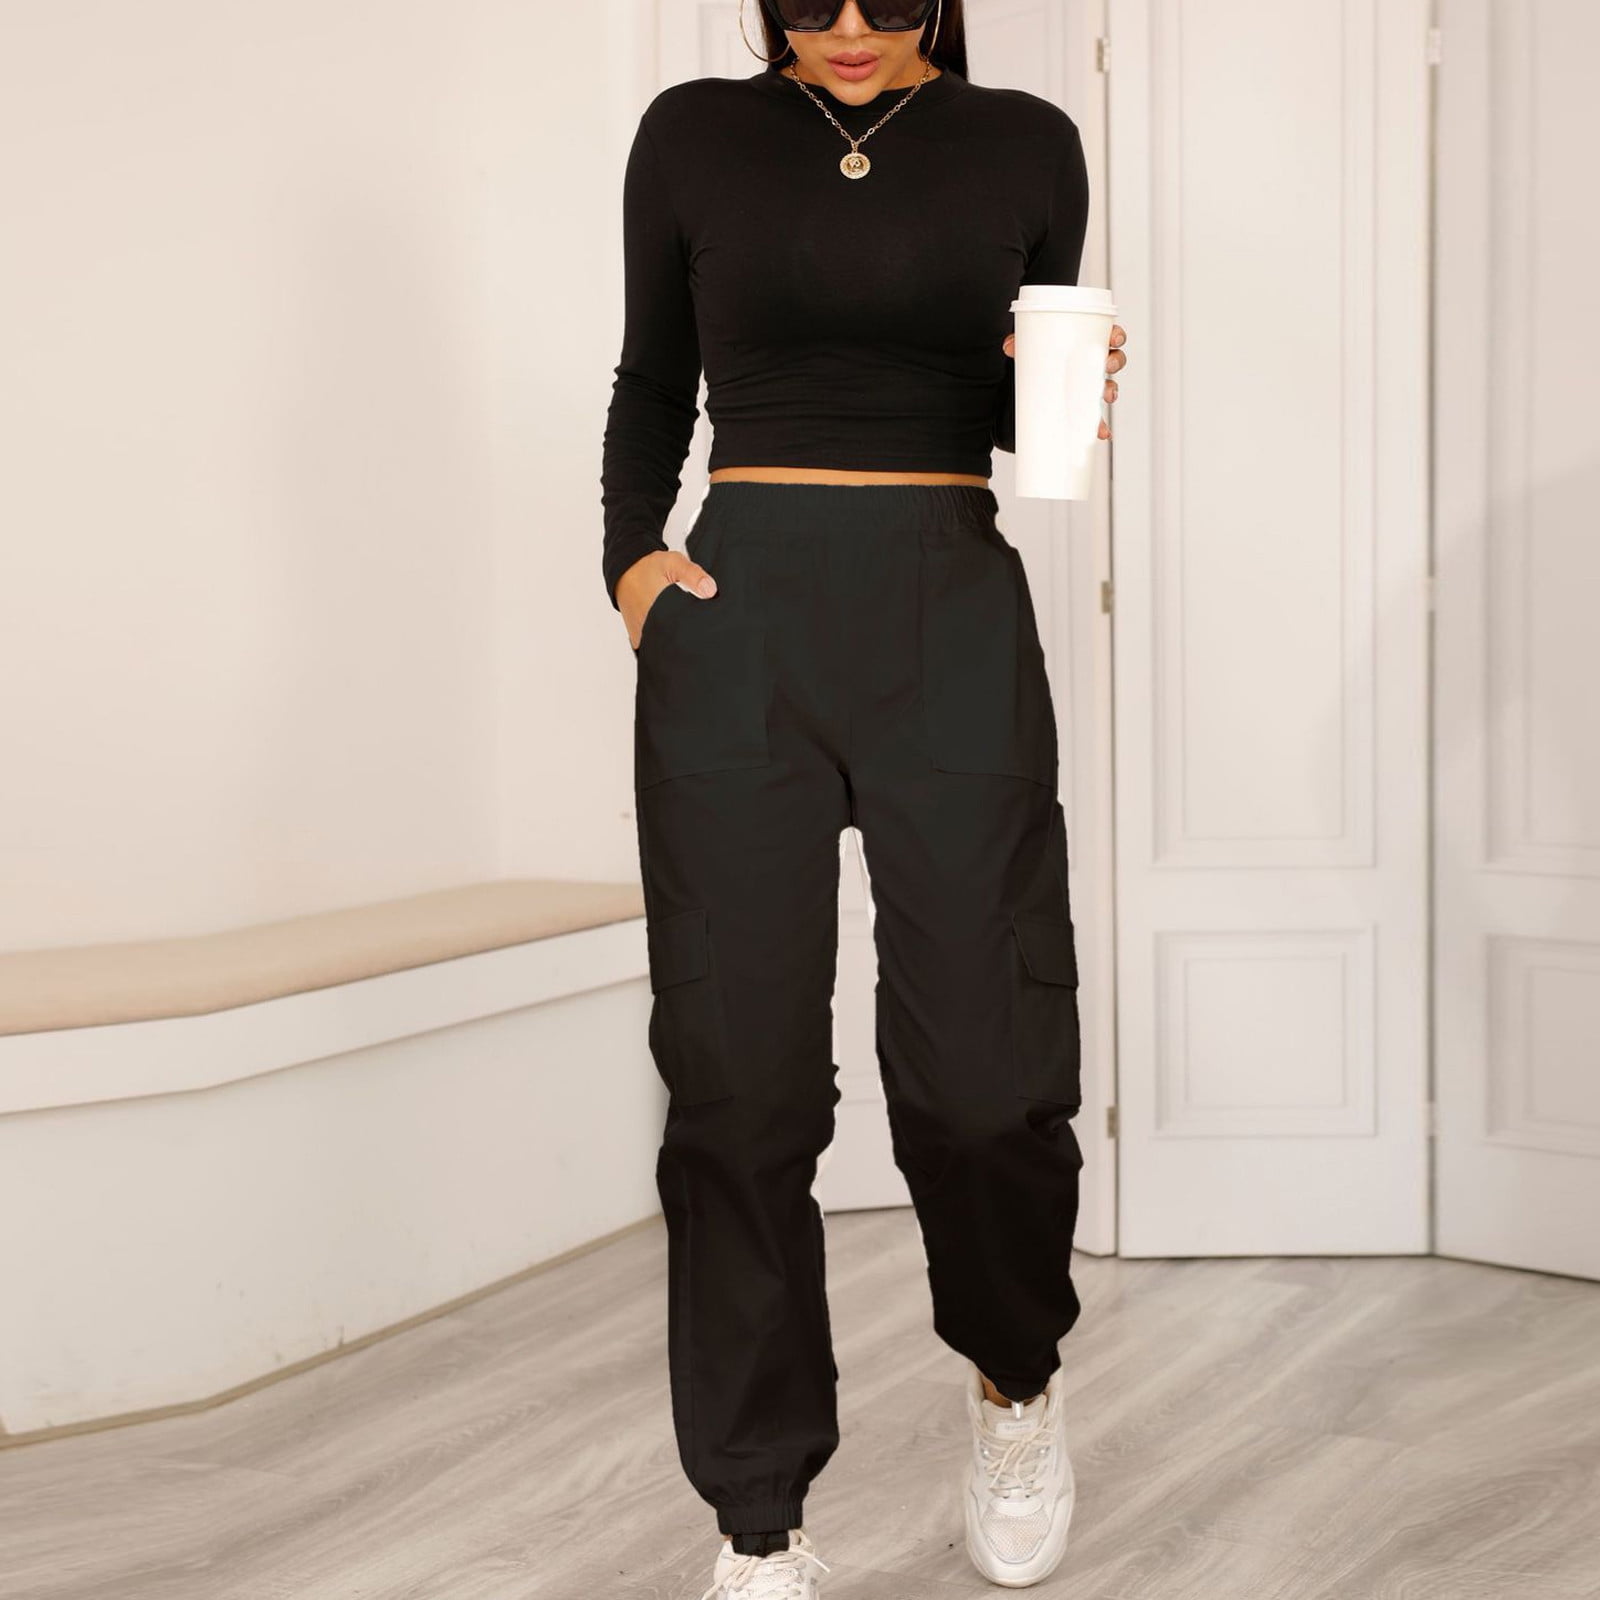 CHGBMOK Clearance Cargo Pants Women Fashion Casual Solid Color